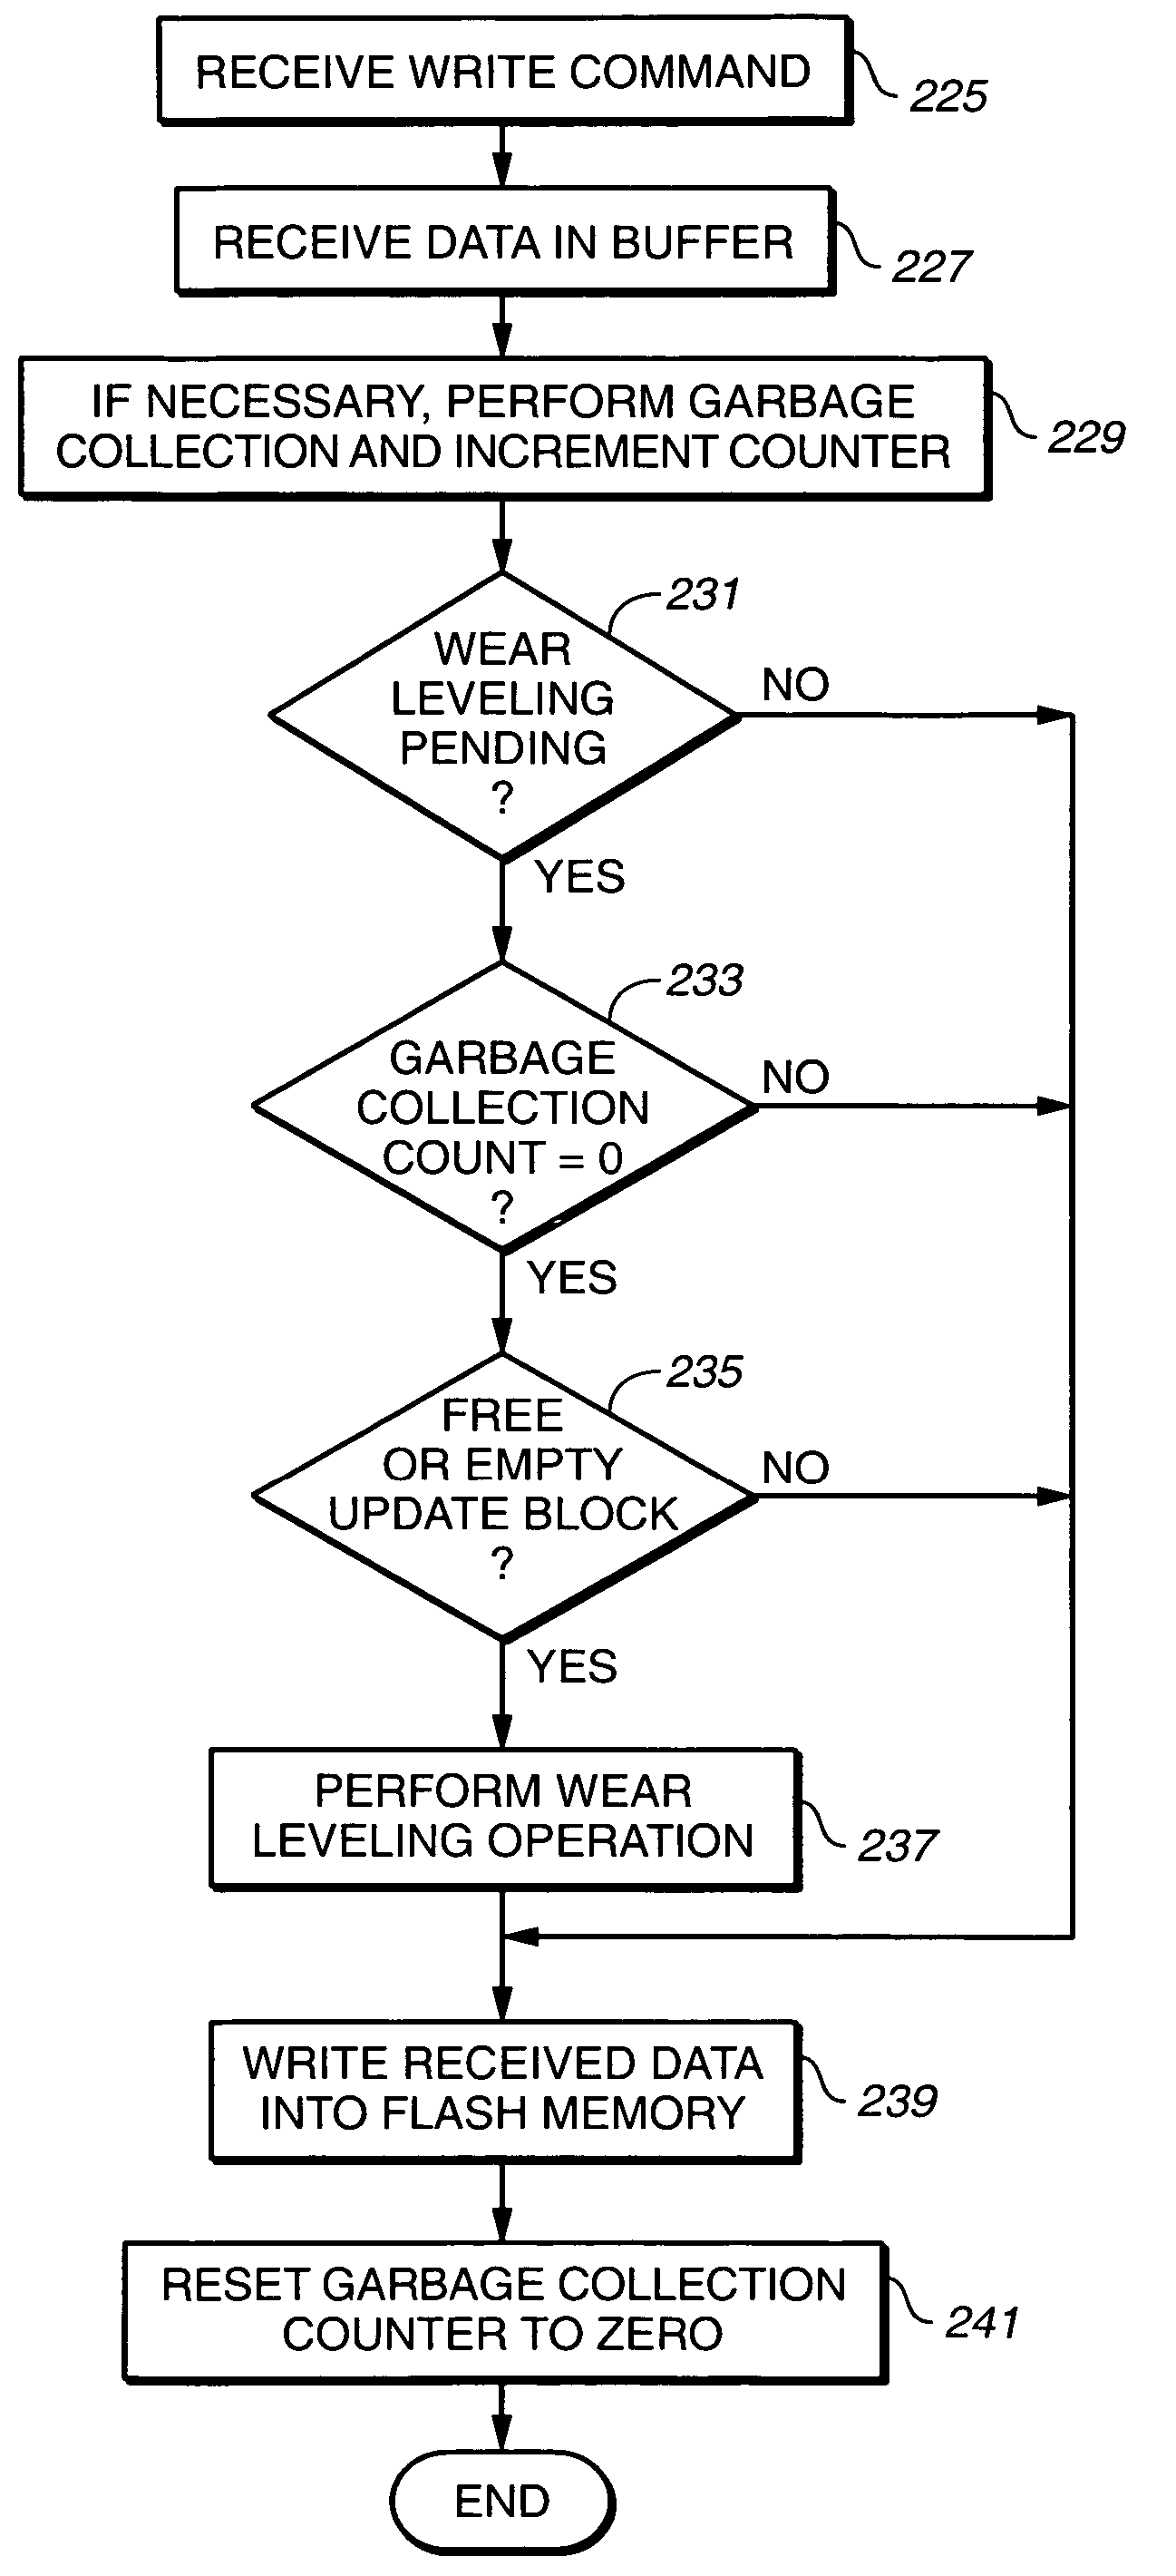 Scheduling of housekeeping operations in flash memory systems